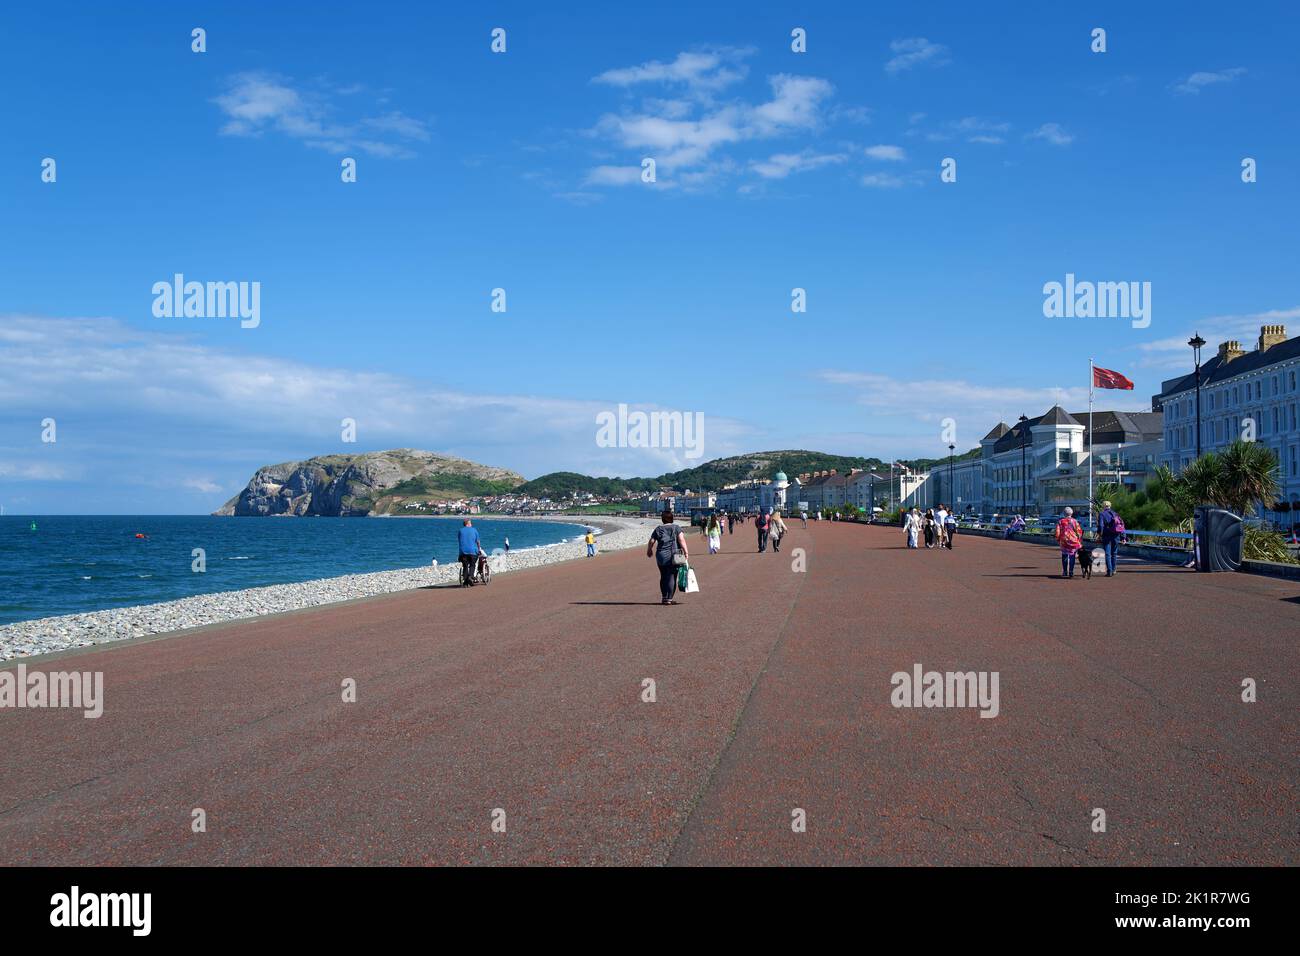 Llandudno Promenade at Llandudno in North Wales is almost two miles long and regarded as one of the best coastal walks in Wales. Stock Photo